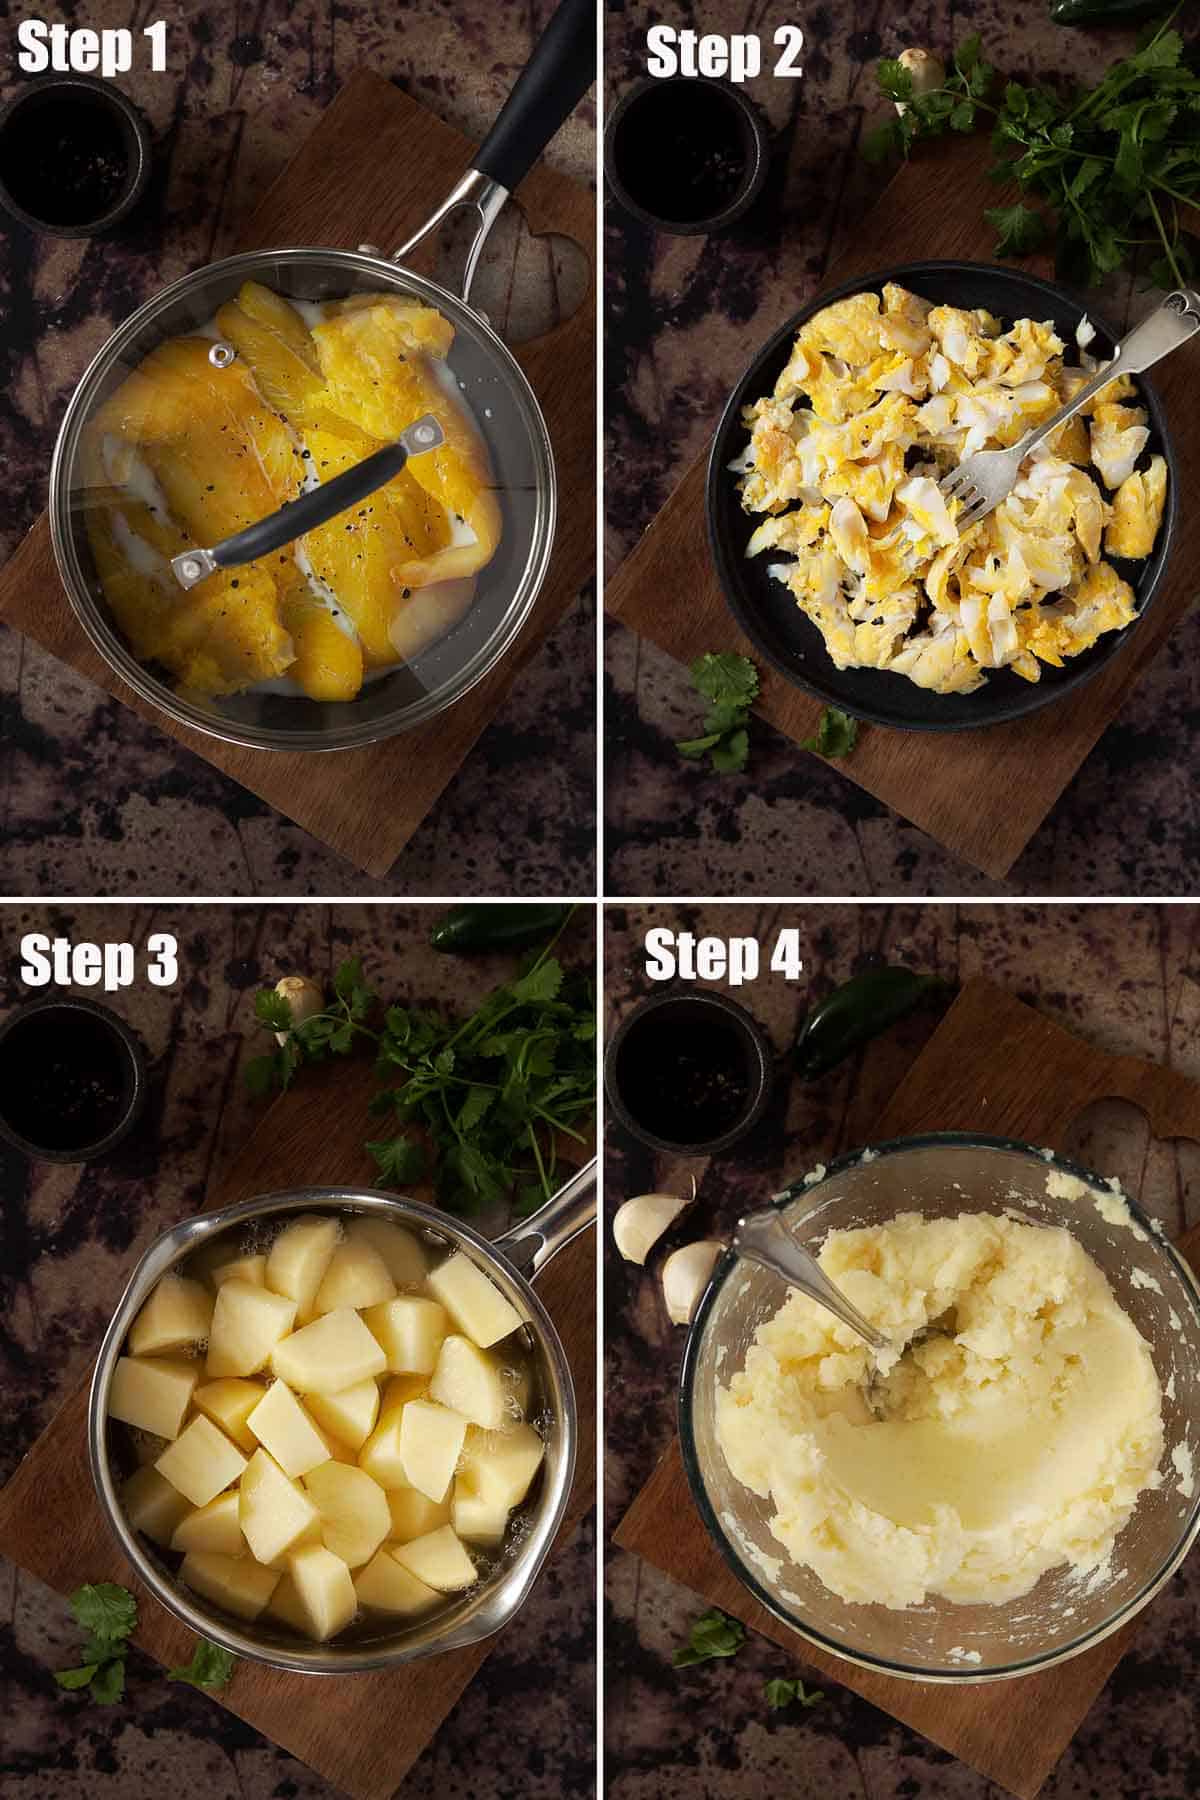 Collage of images showing fish and mashed potatoes being made.